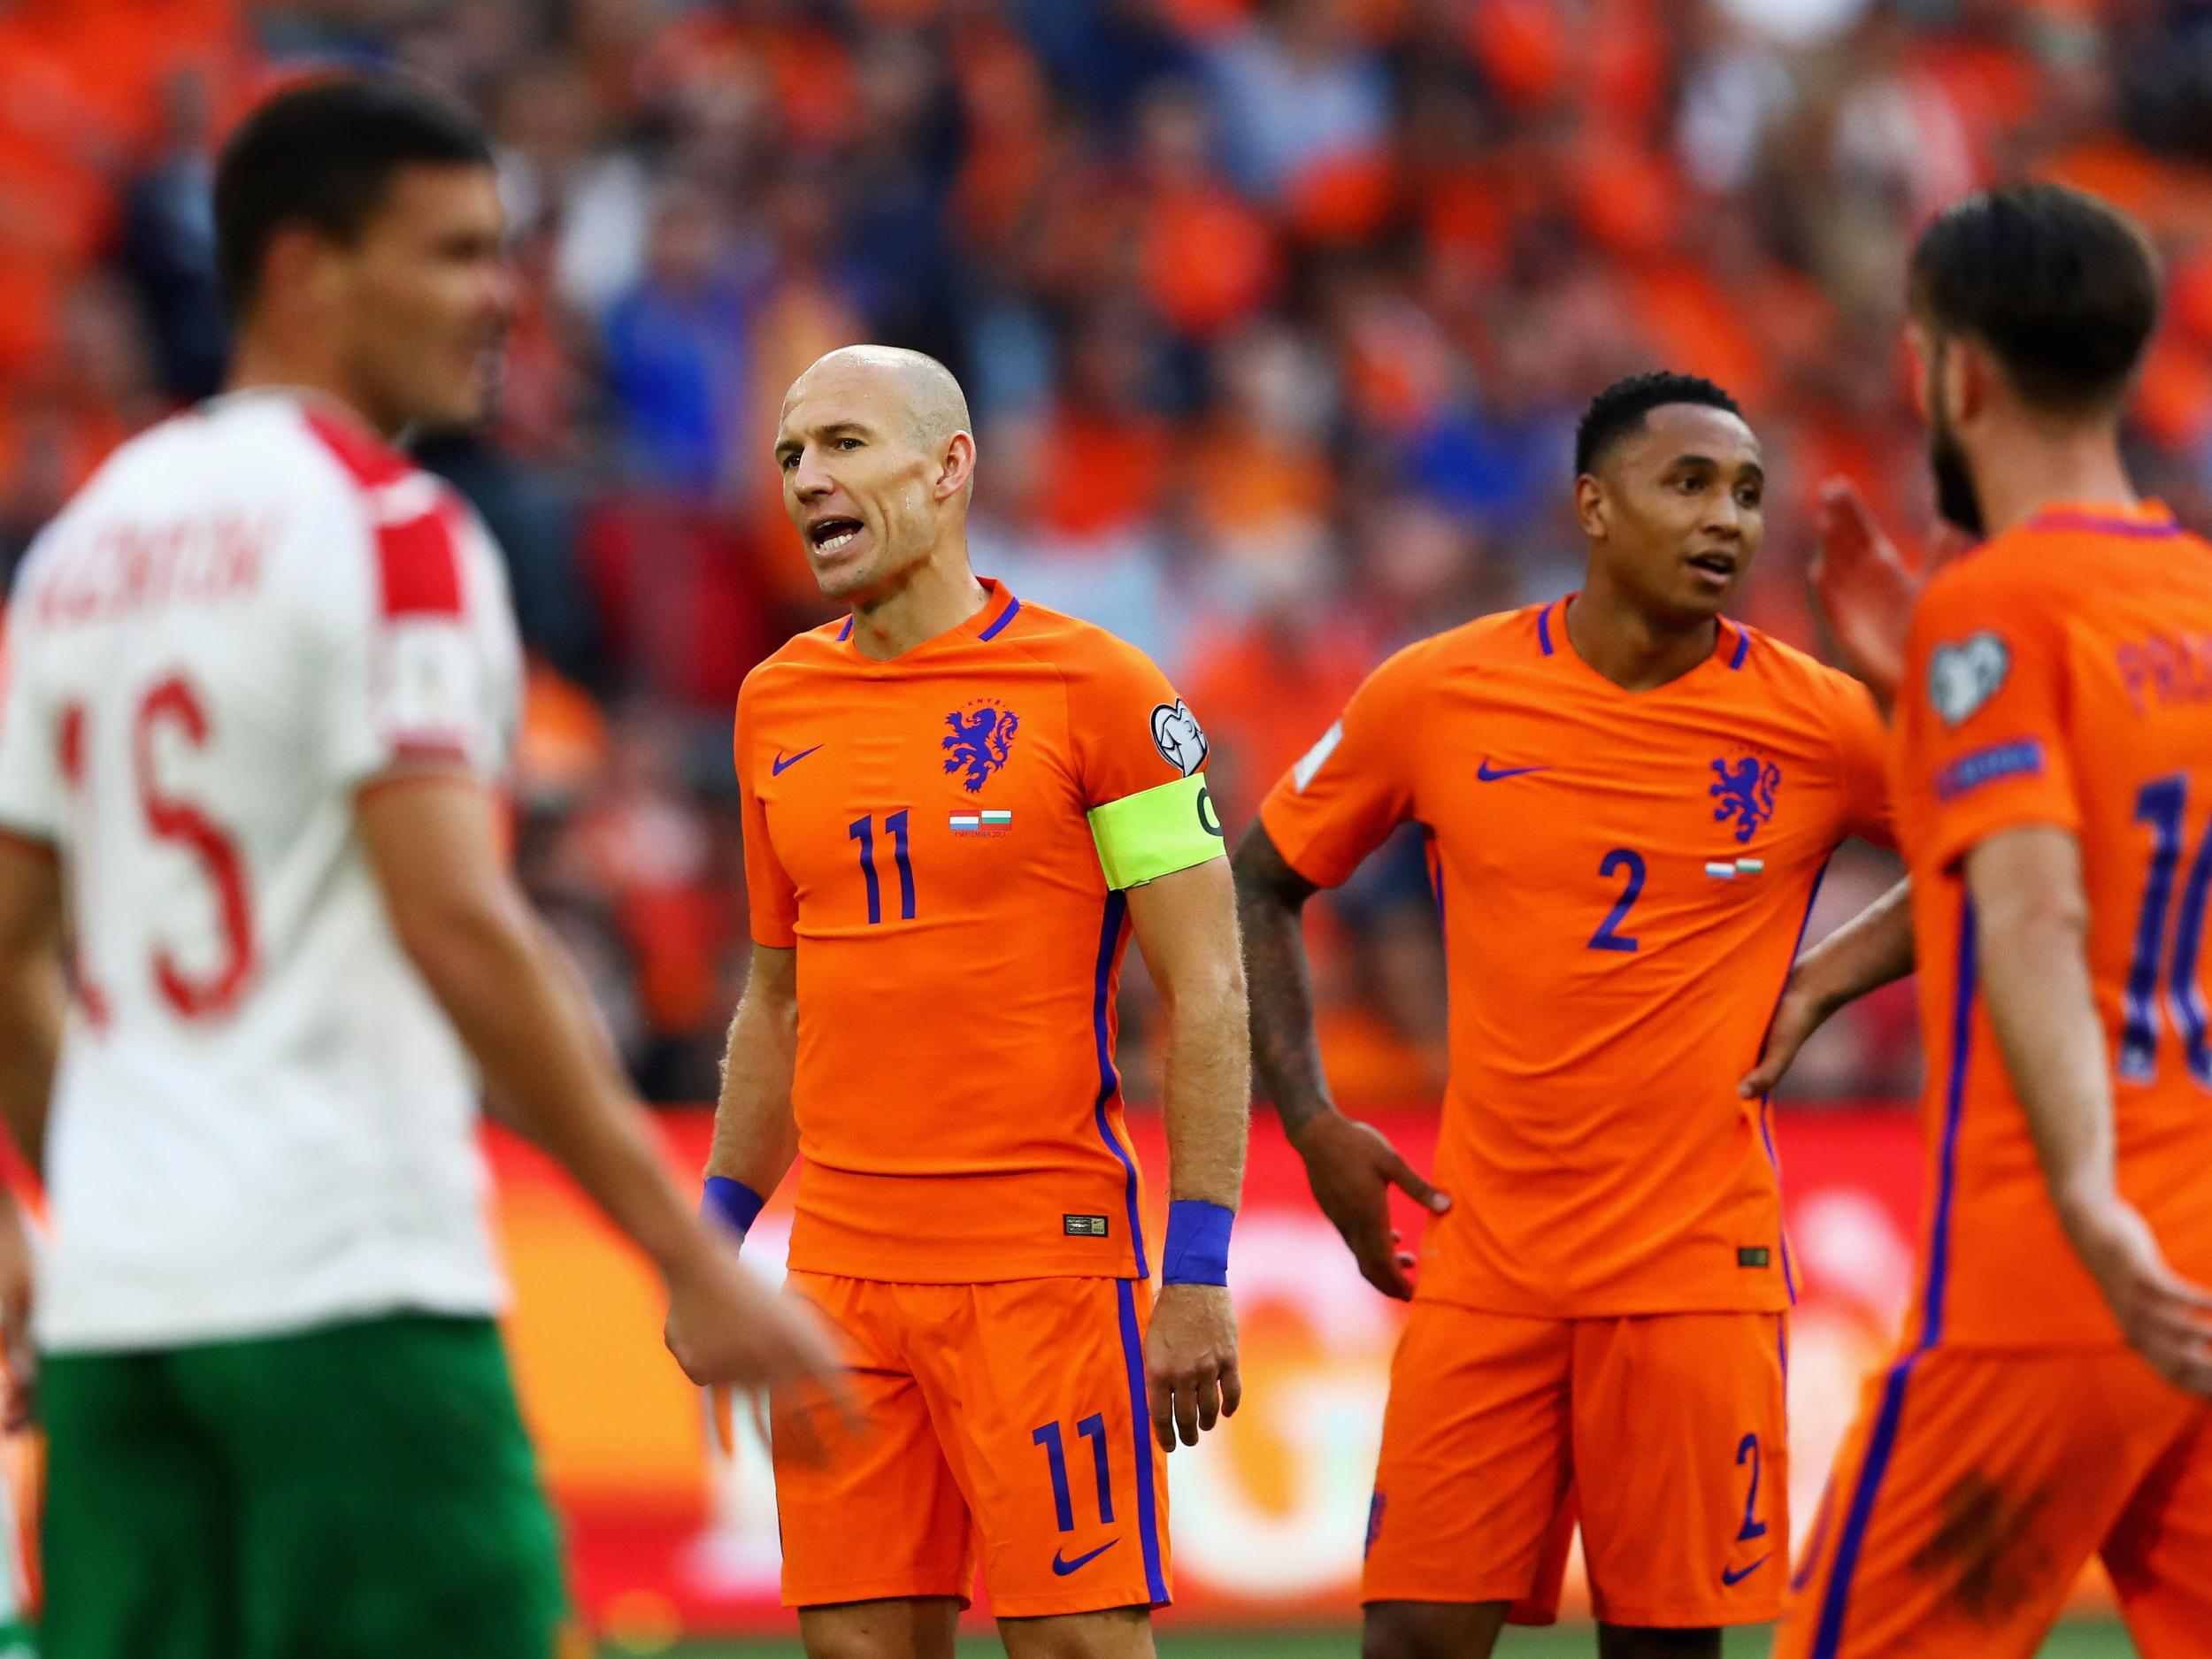 Holland have endured a difficult World Cup qualification campaign